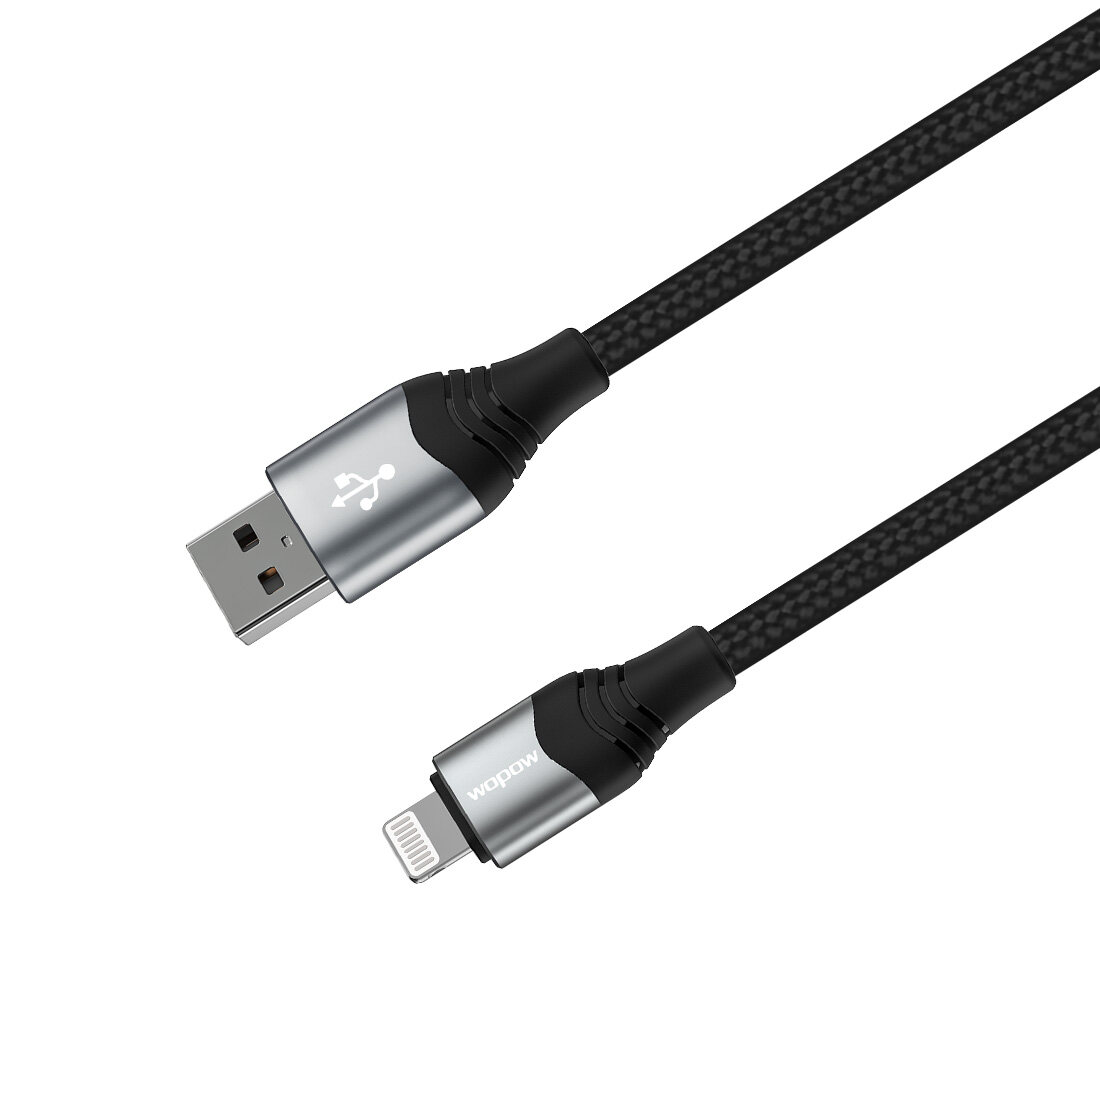 Braided Data Cable Factory Direct Sales: Quality, Reliability, and Affordability